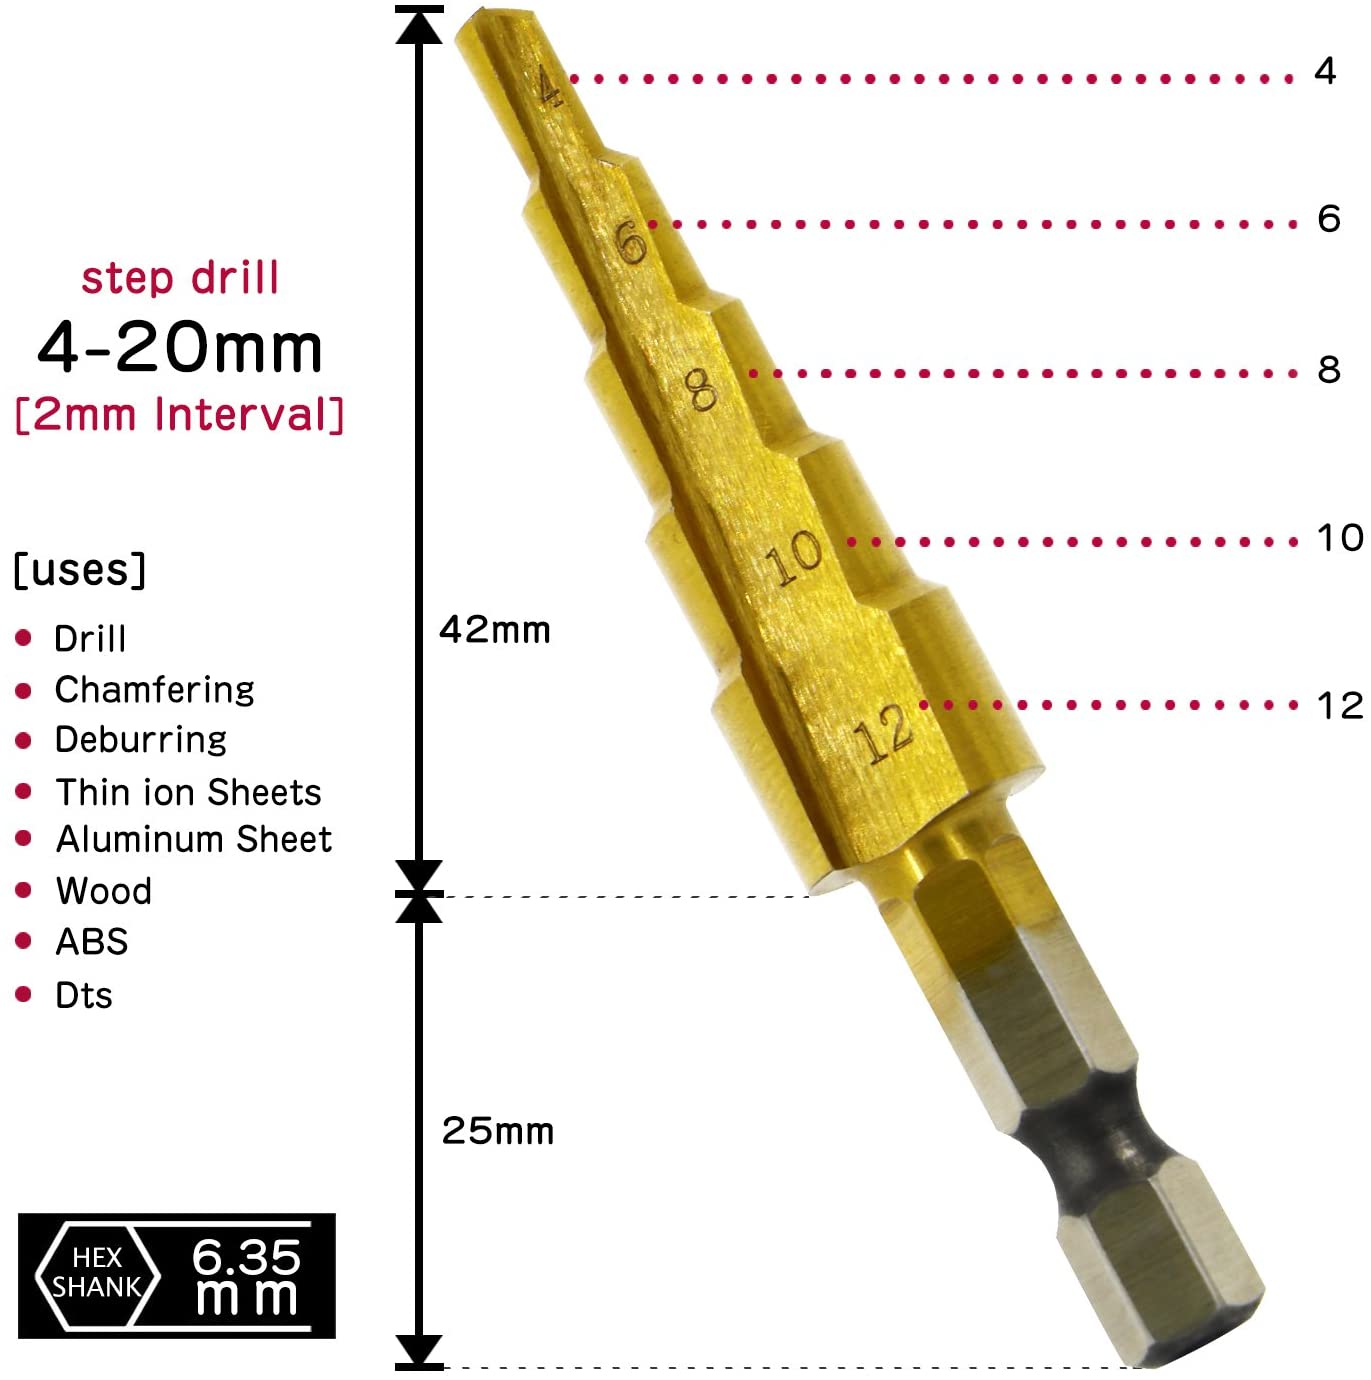 Set Of 3 Staggered Countersink Drill Bit, Hss Stainless Steel, Titanium Conical Triangle, With Hexagonal Shank, For Screwdriver Drilling On Steel, Brass, Wood, Plastic - image 2 of 7